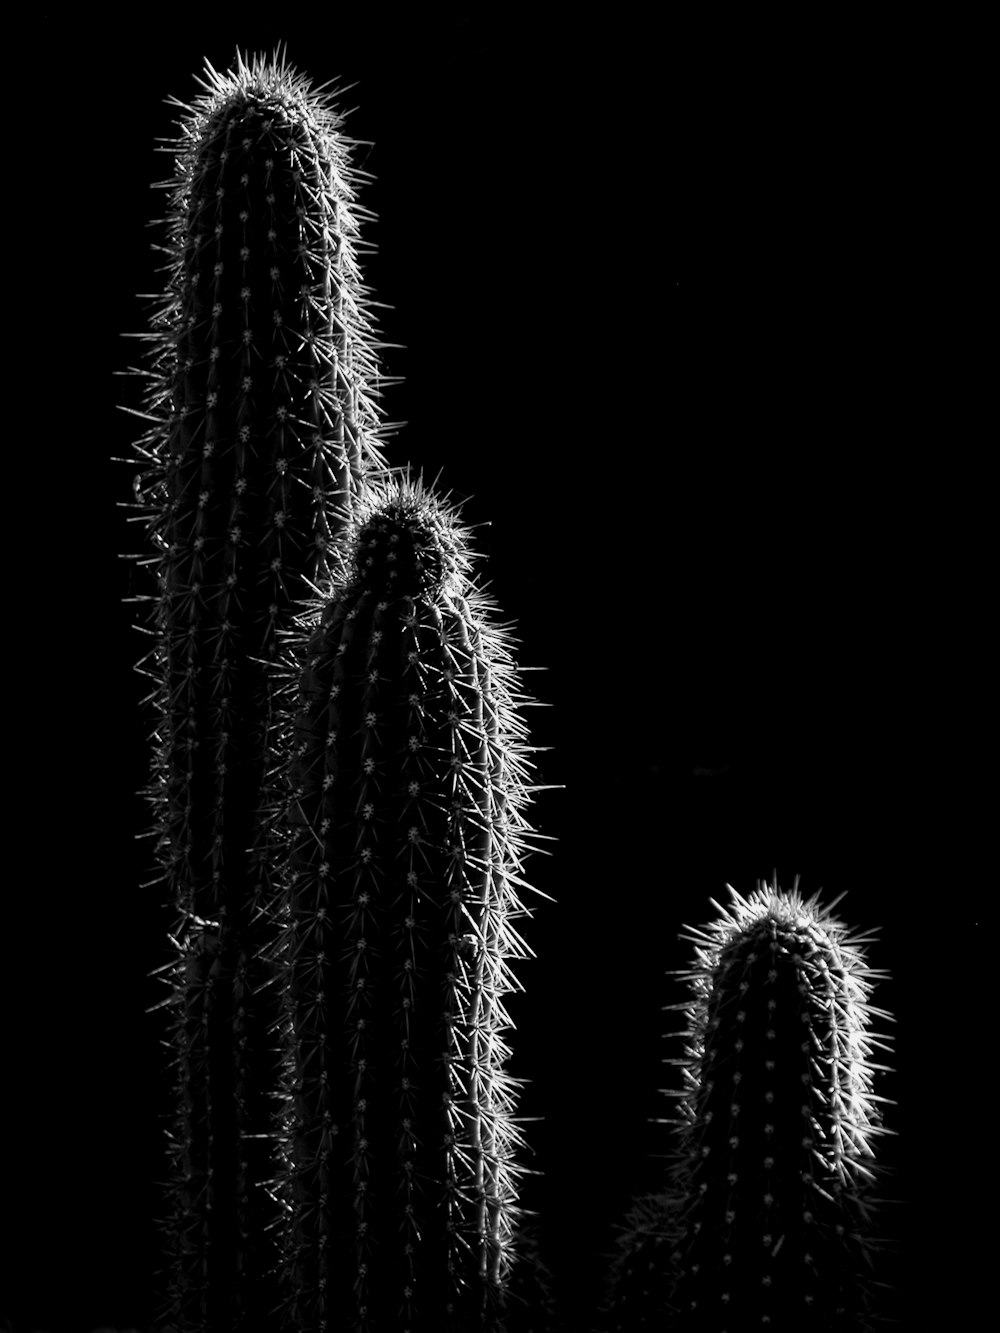 grayscale photo of cactus